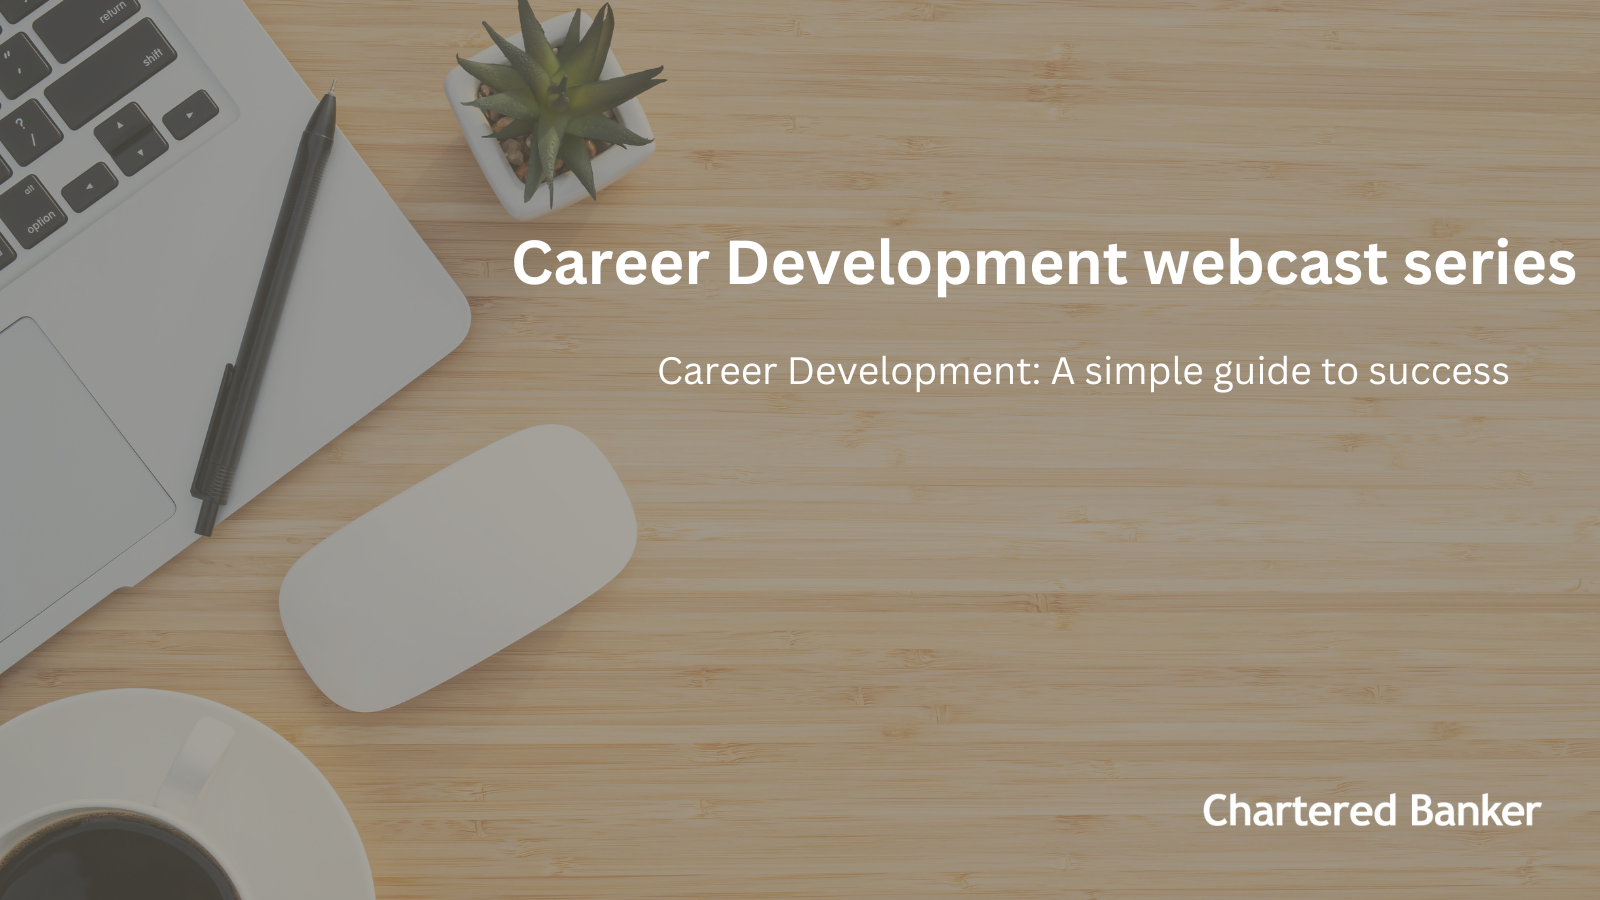 Career Development: A simple guide to success